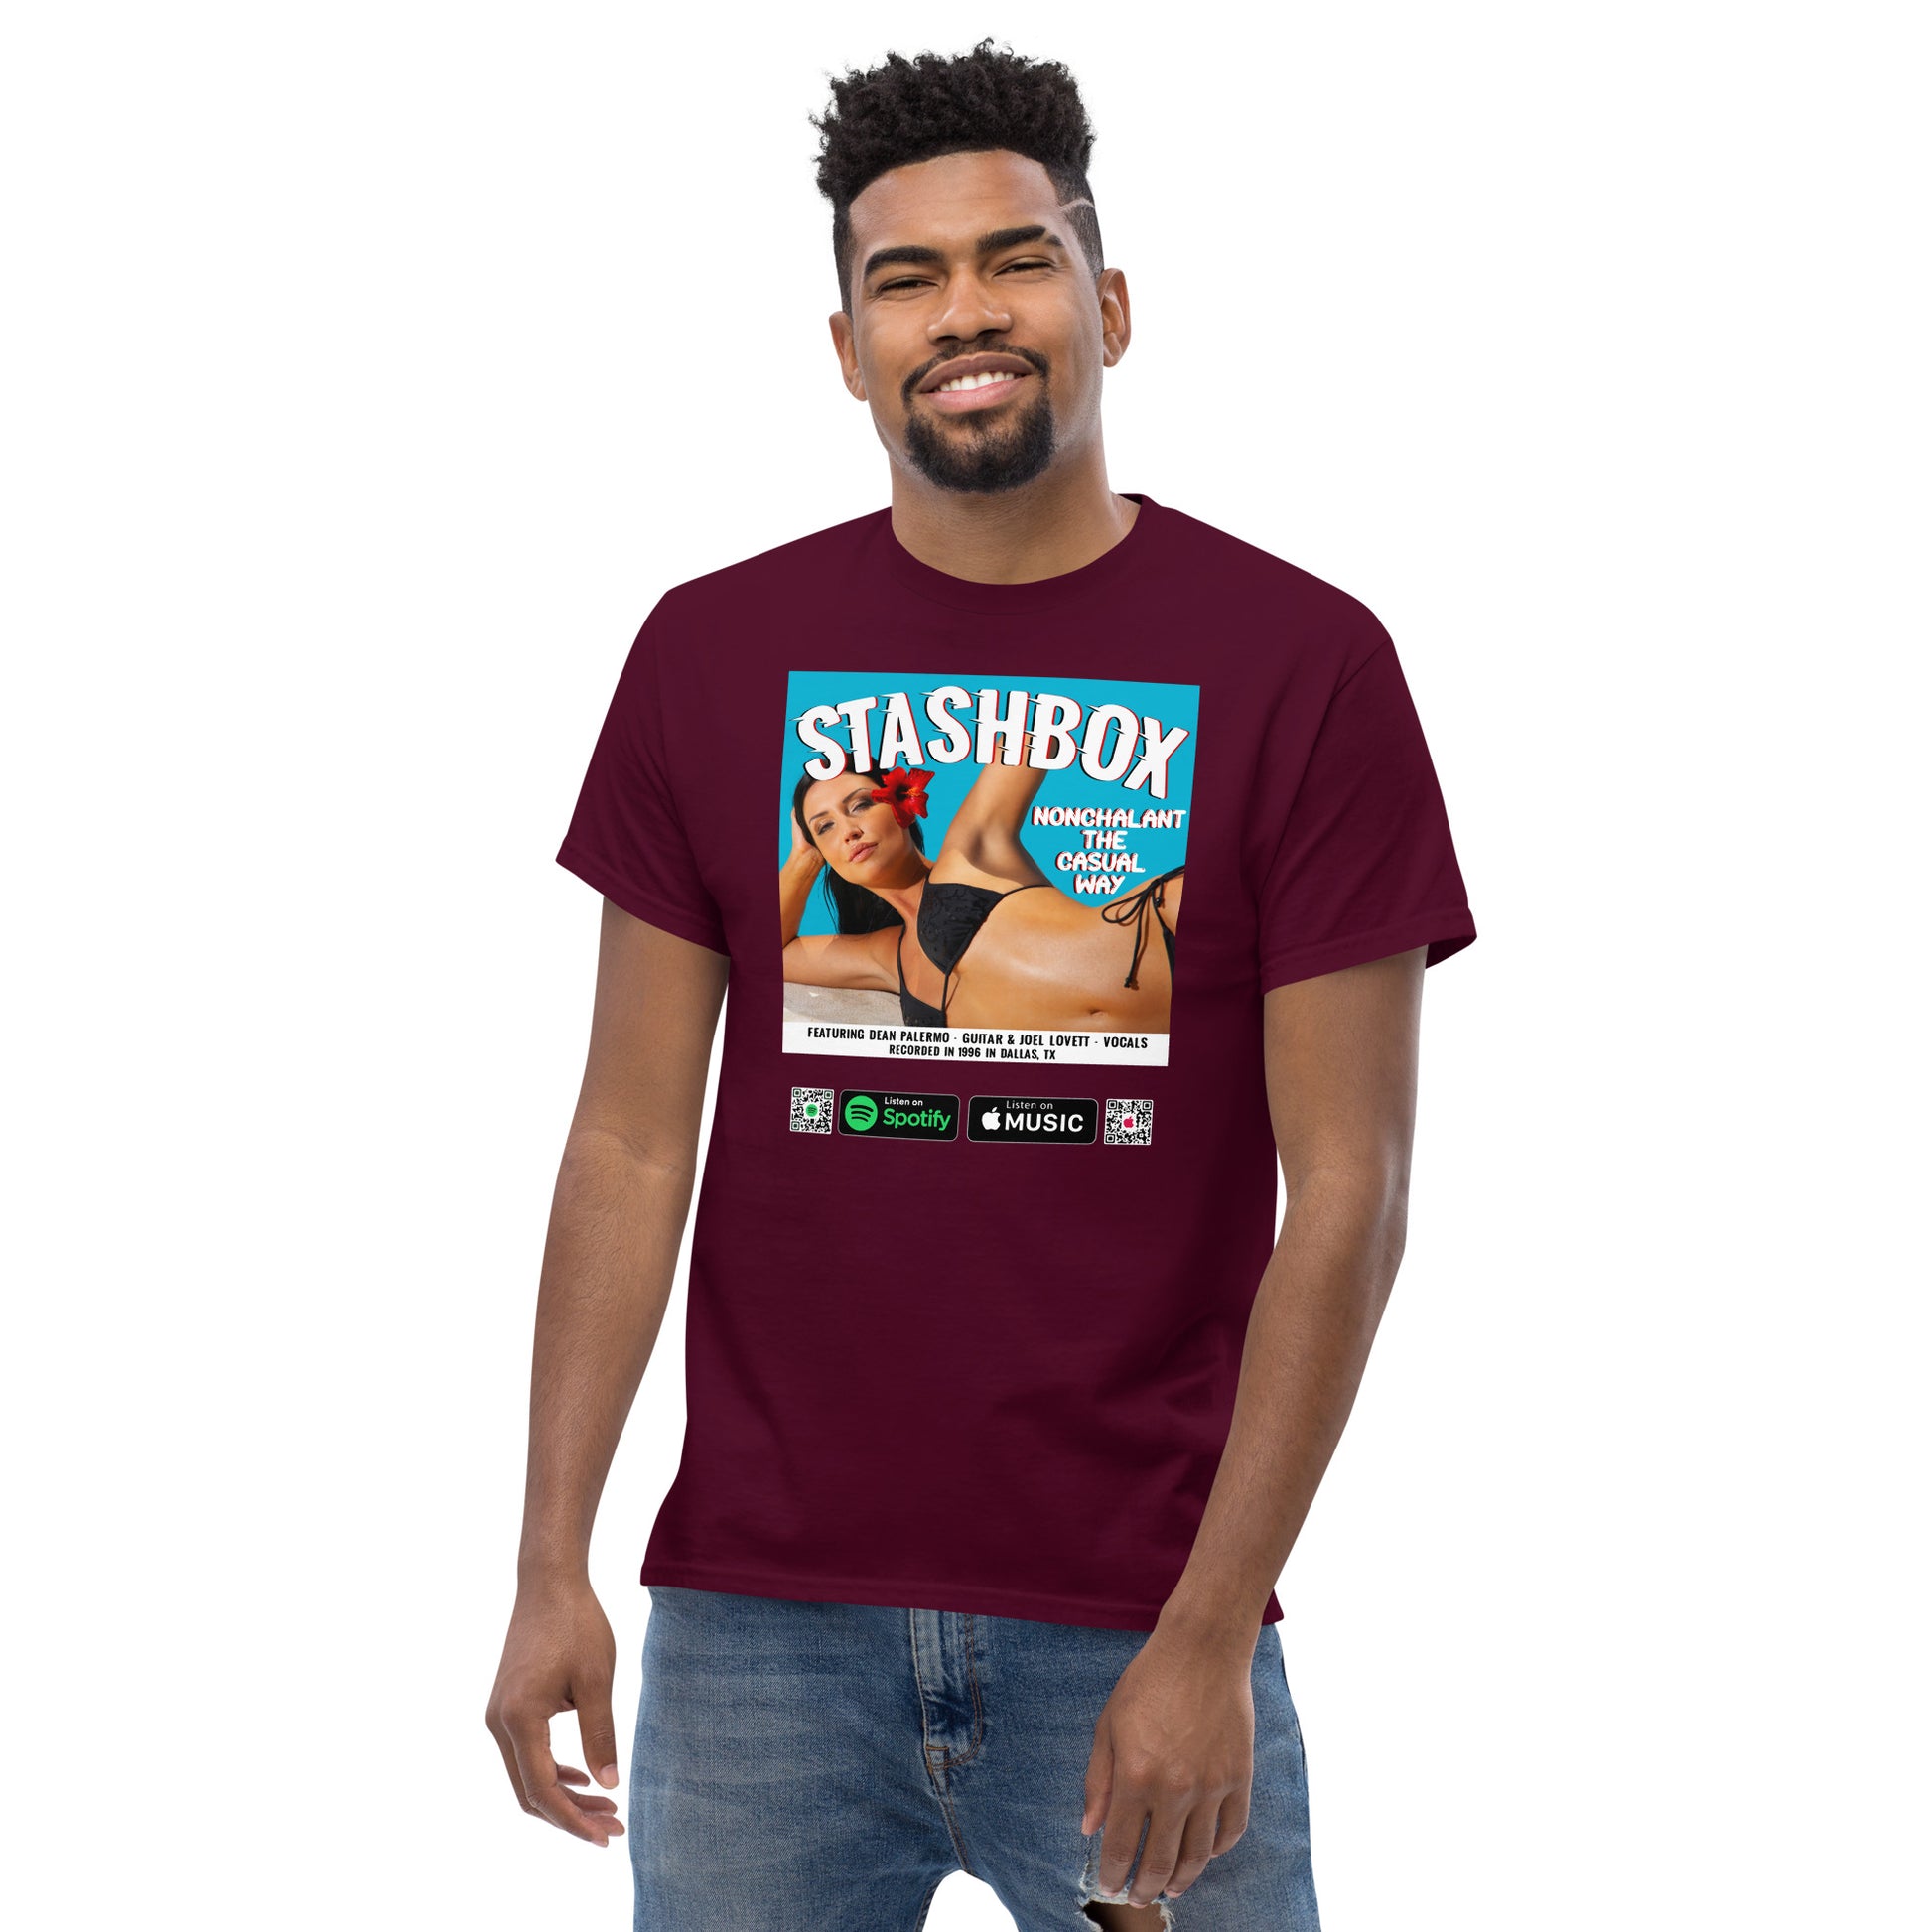 Embrace casual coolness with our Nonchalant In The Casual Way Men's Classic Tee, Design #024. Your fashion, your ticket to effortless style, exclusively at Stashbox.ai.